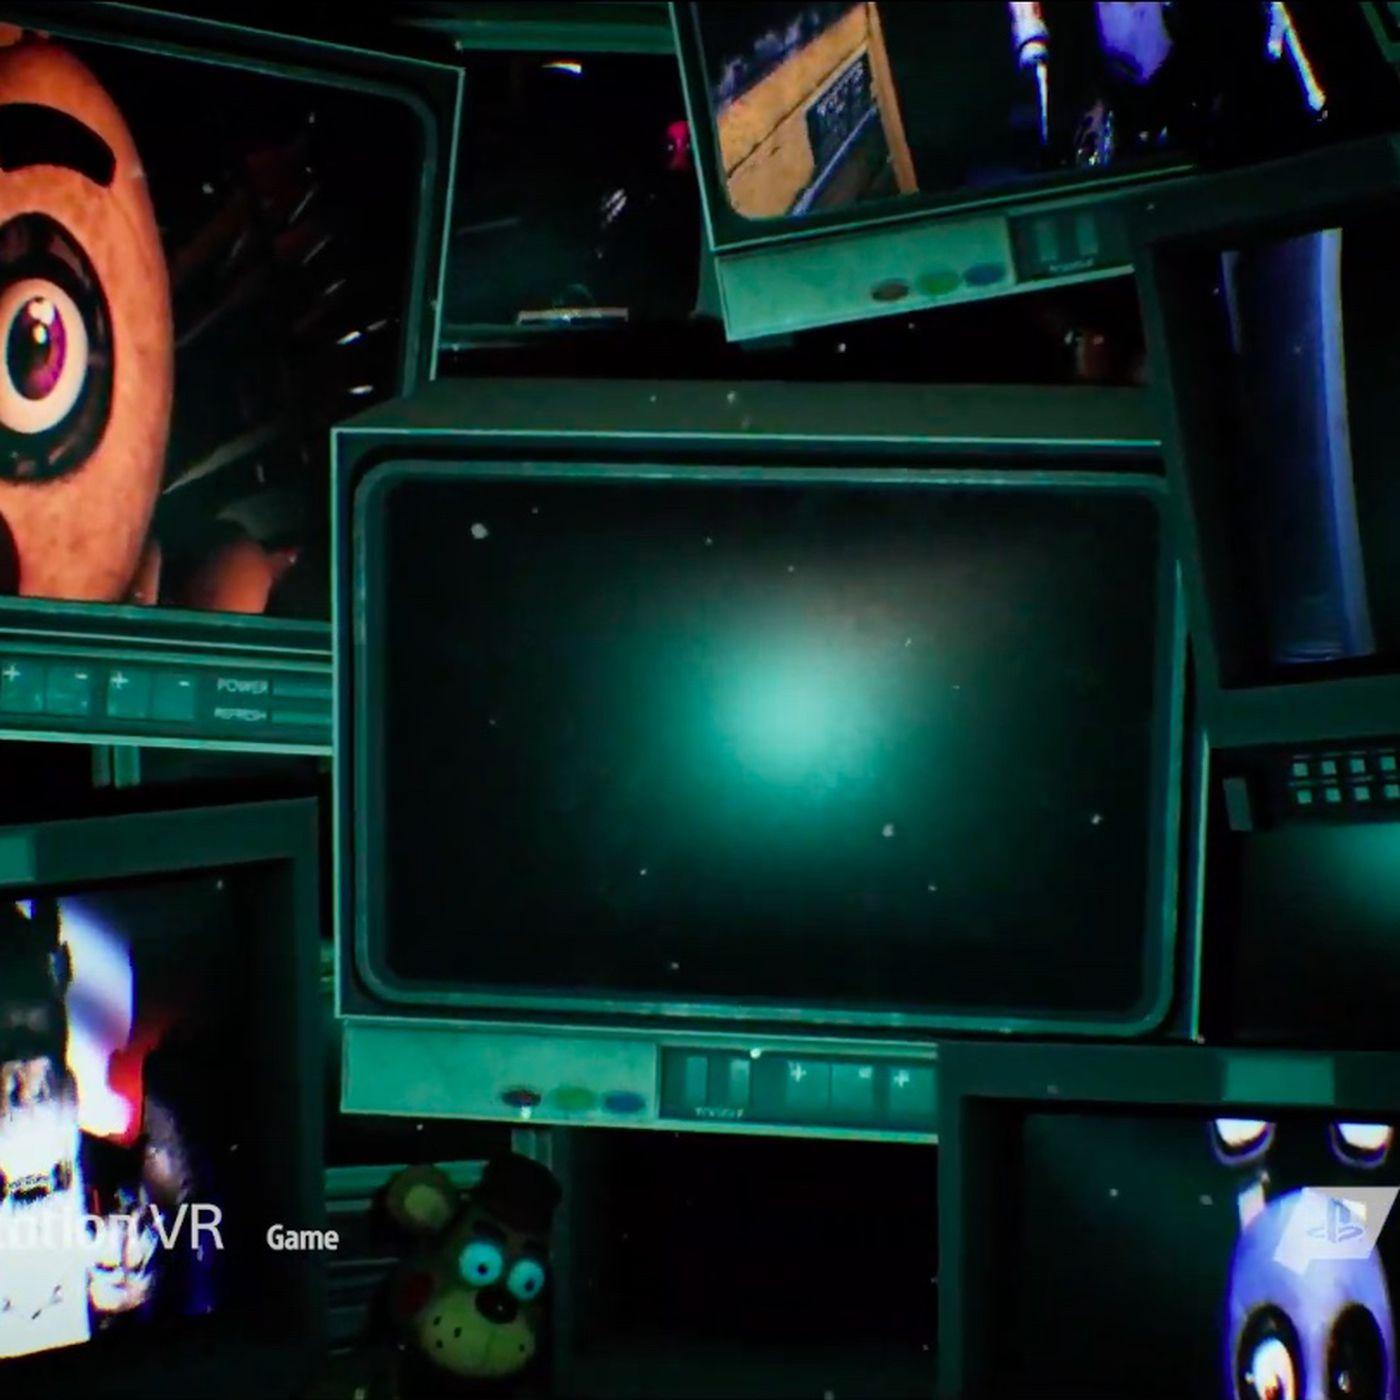 Five Nights at Freddy's announced for PlayStation VR